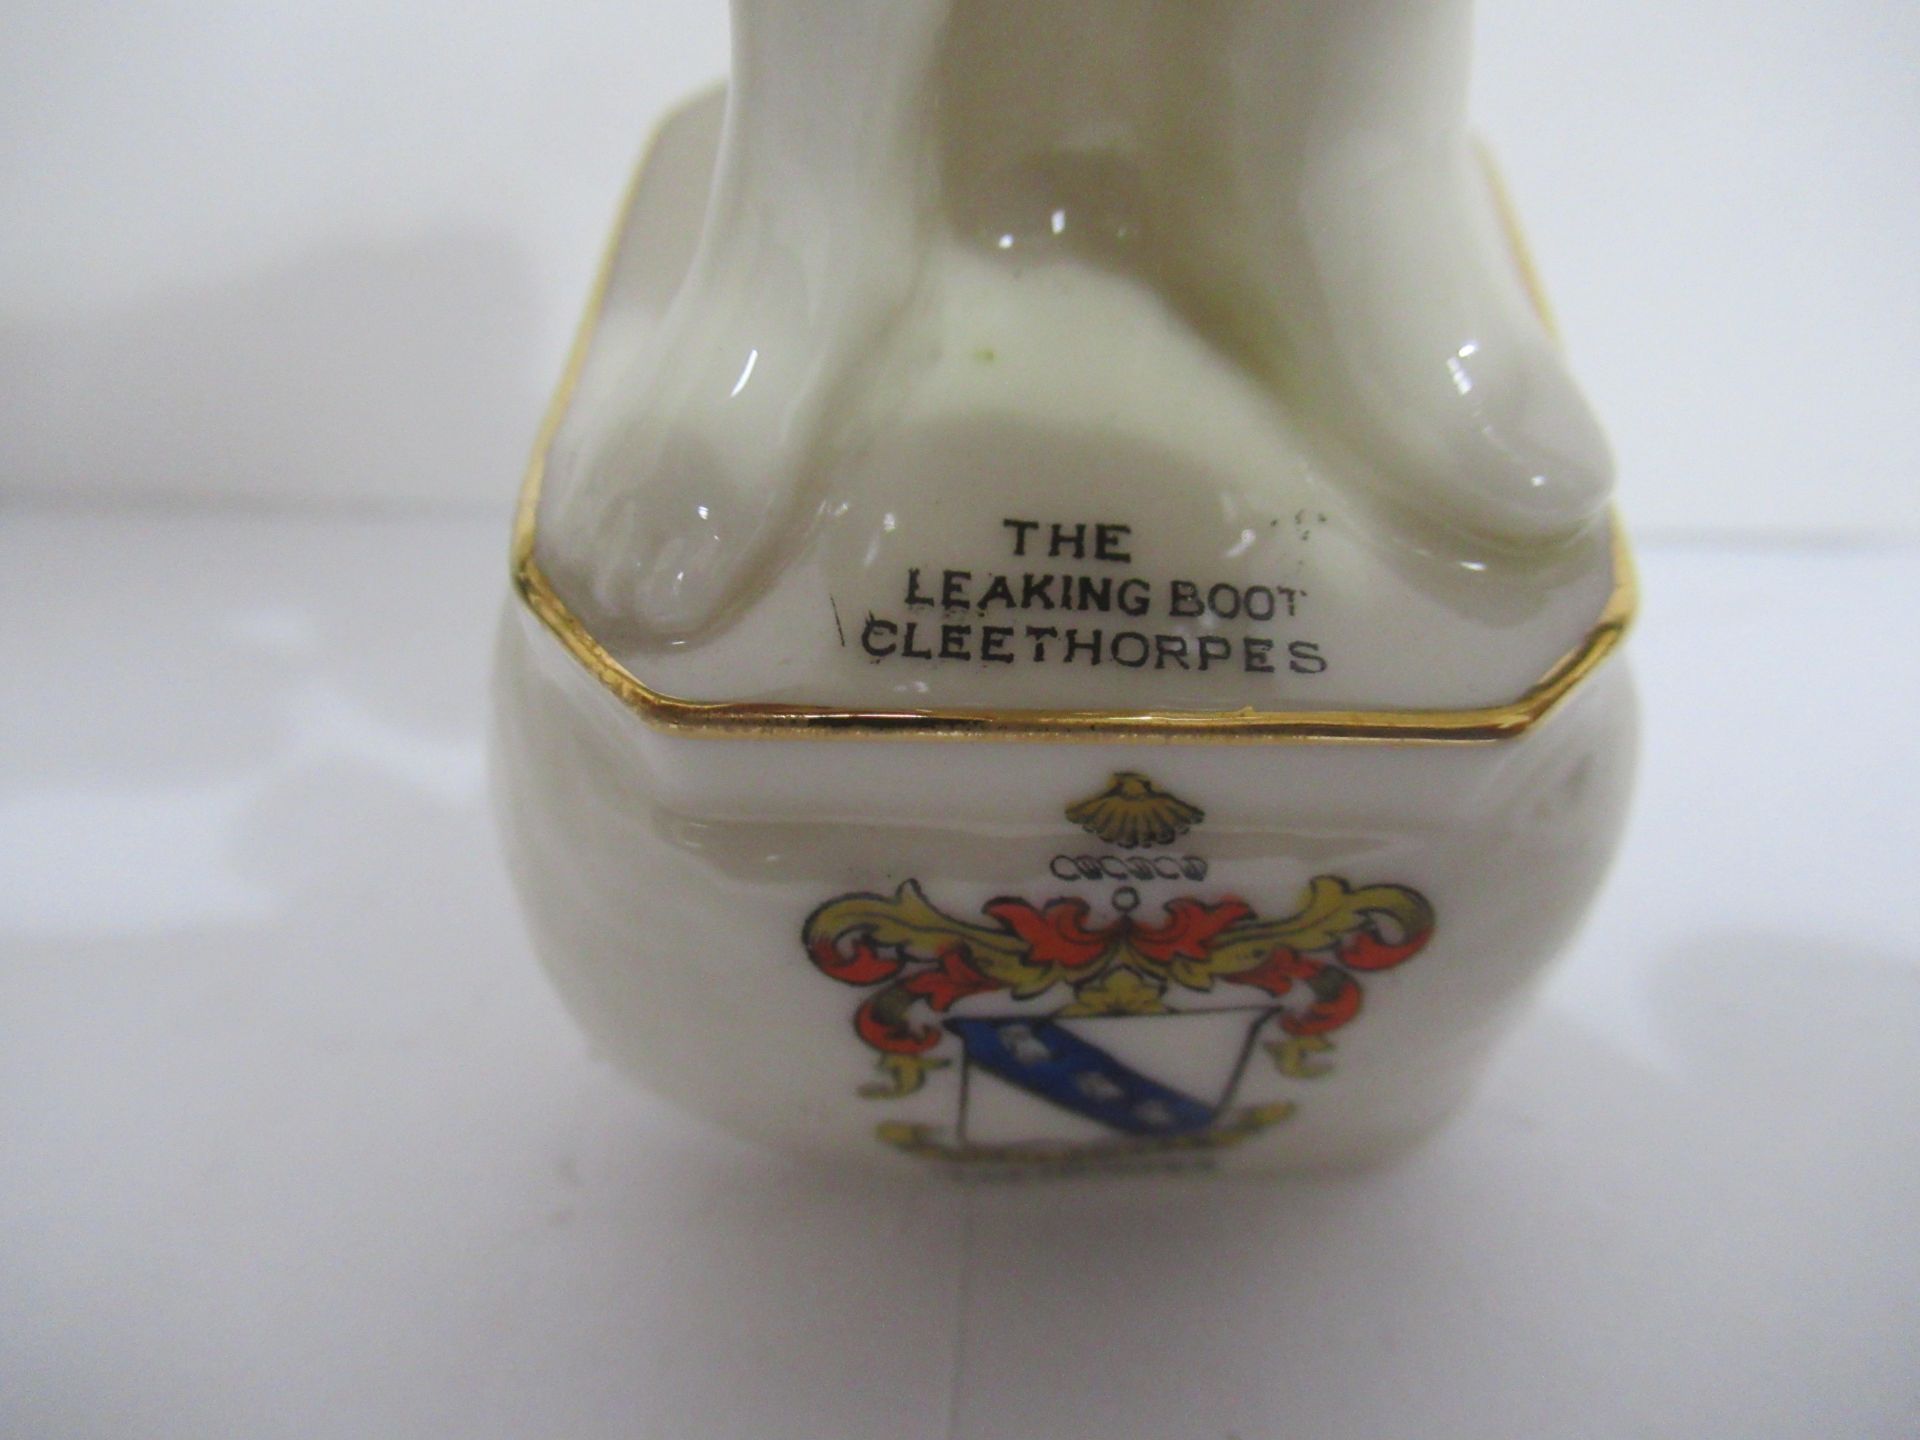 2x Crested China figures of the Leaking Boot' both with Cleethorpes coat of arms - Image 7 of 13